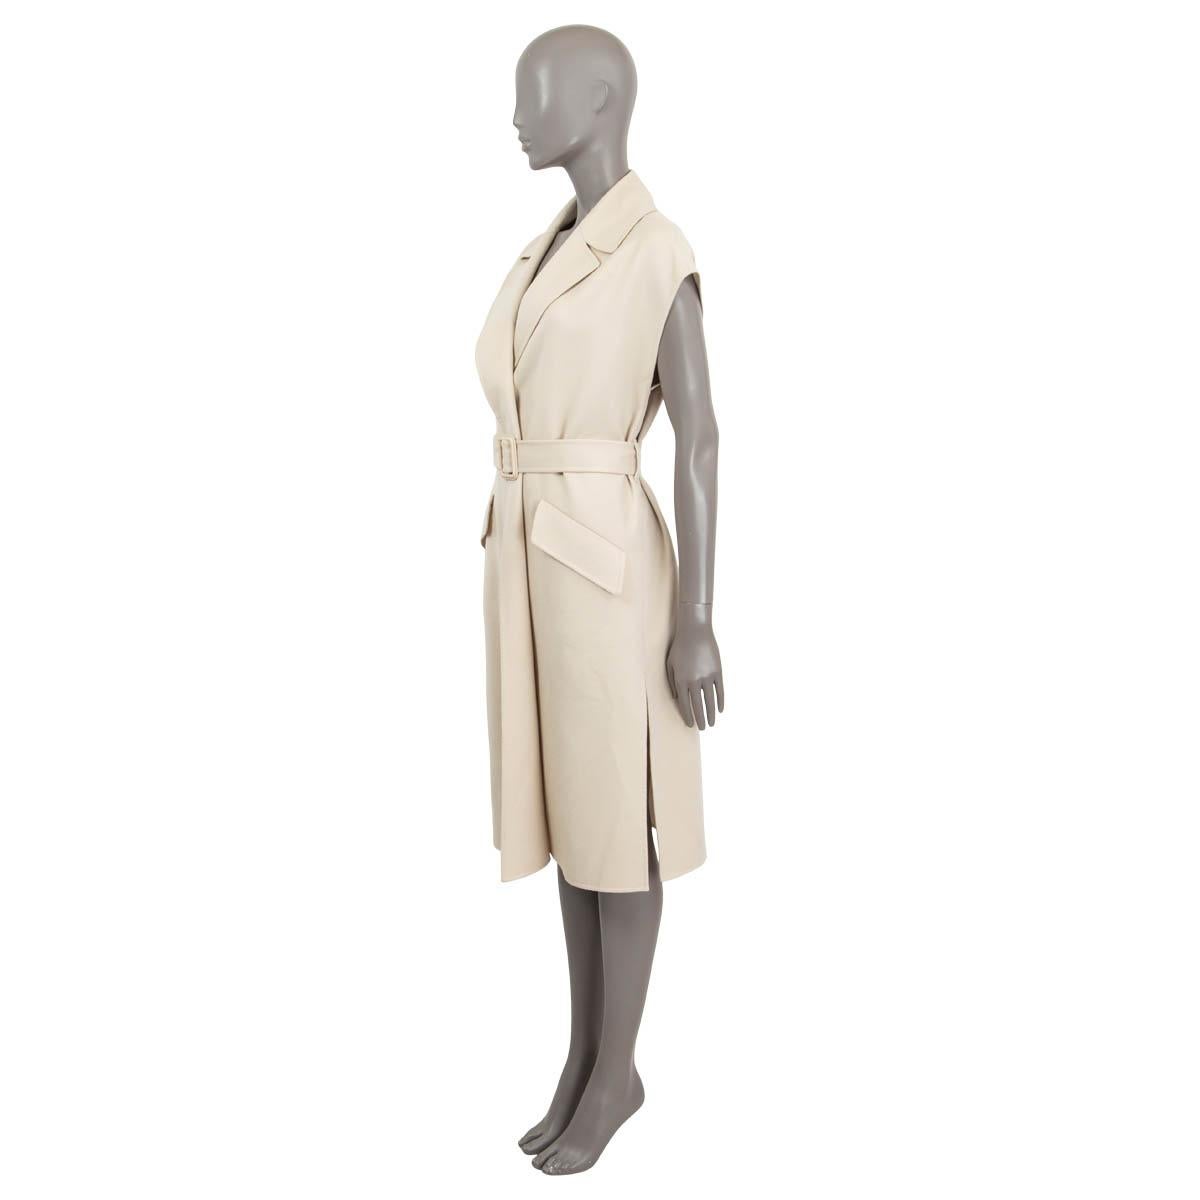 100% authentic Loro Piana 2021 'Florian' sleeveless cashmere coat in light sand cashmere (100%). Features a detachable belt and two flap pockets. Unlined. Has been worn once and is in virtually new condition.

Measurements
Tag Size	XS
Size	XS
Bust